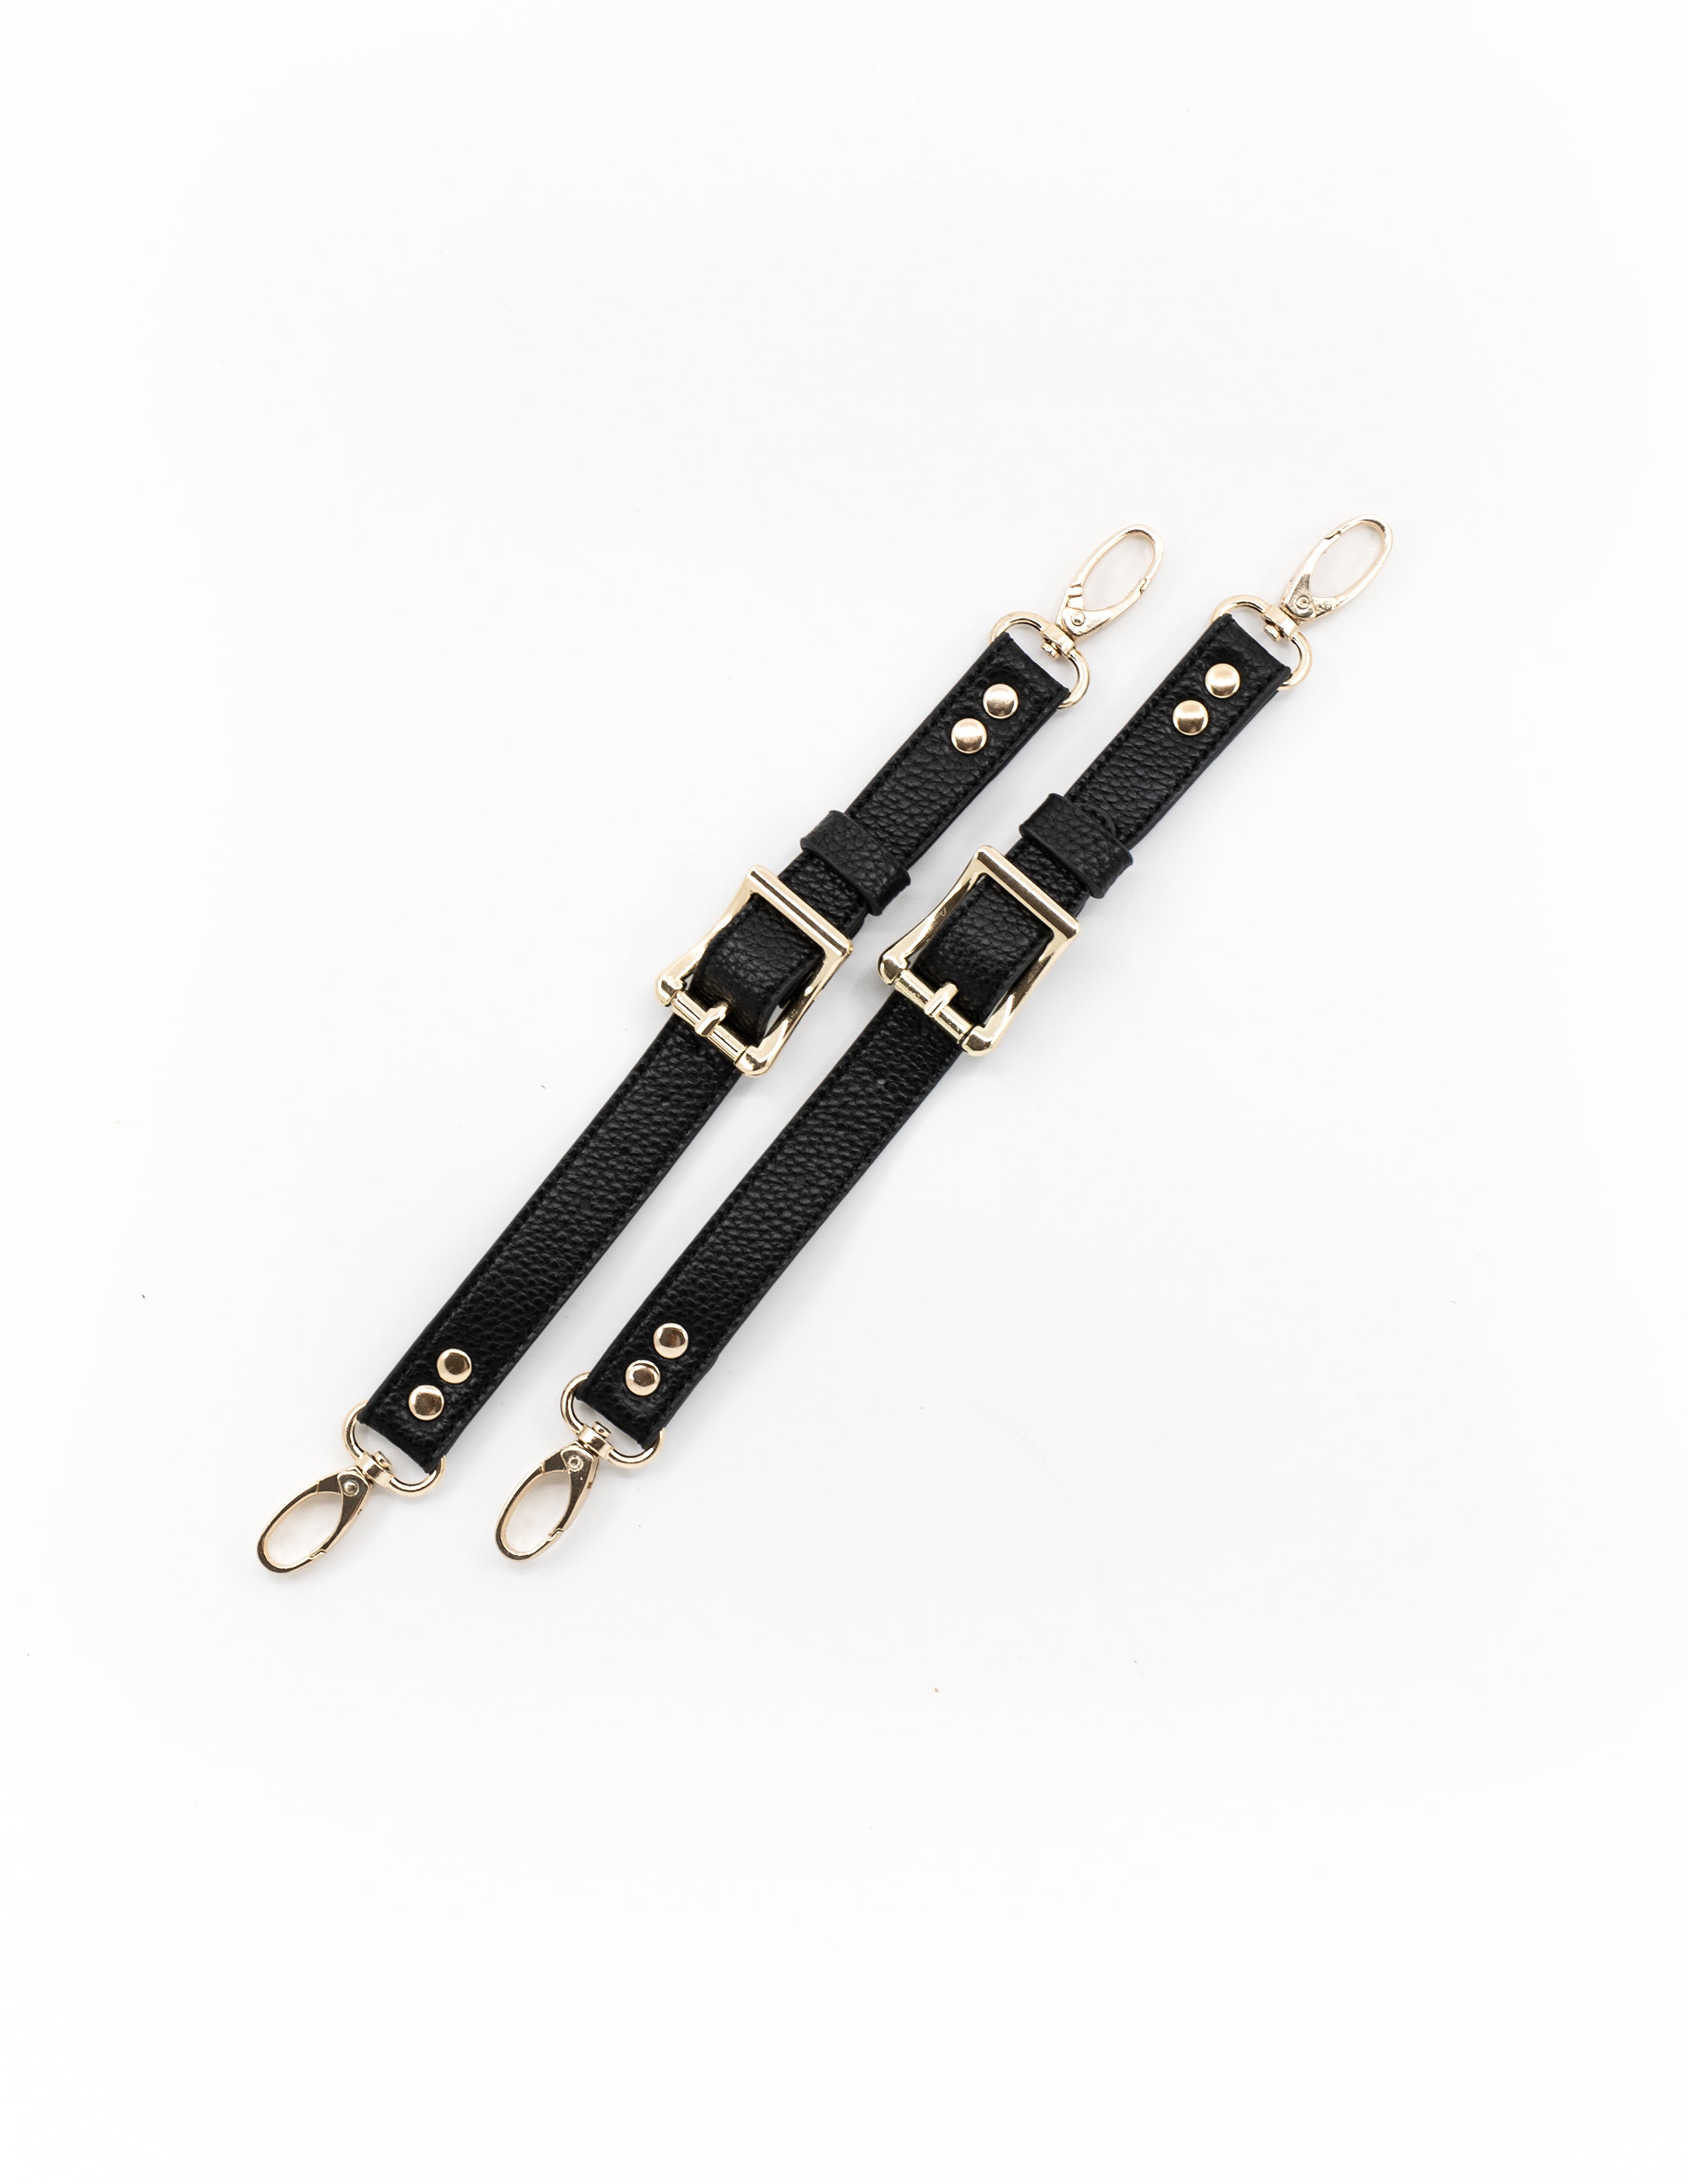 third camera extension straps for camera harness